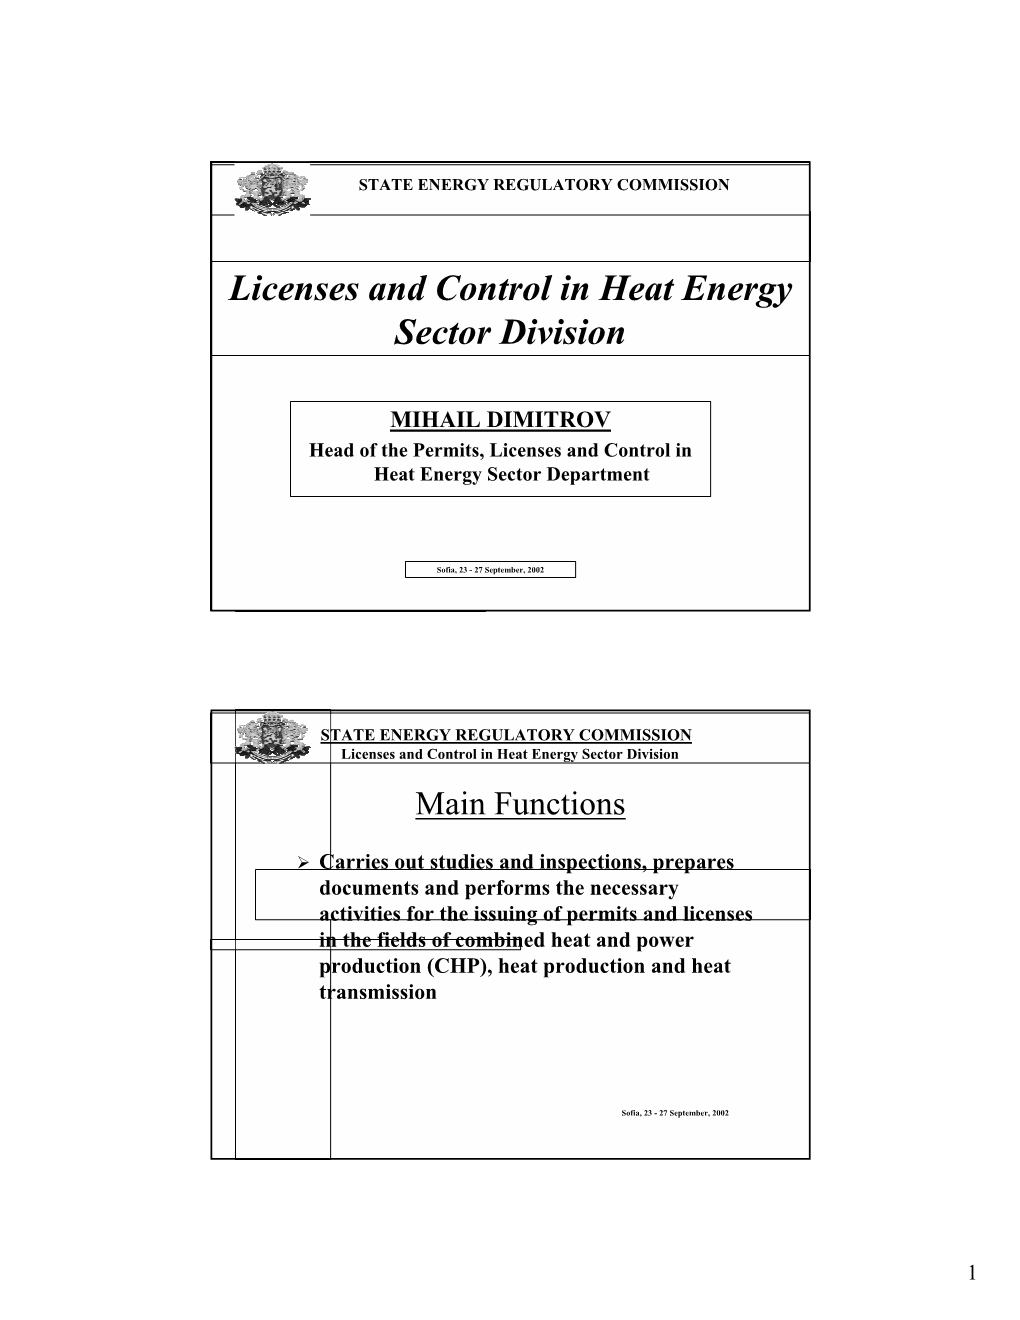 Licenses and Control in Heat Energy Sector Division